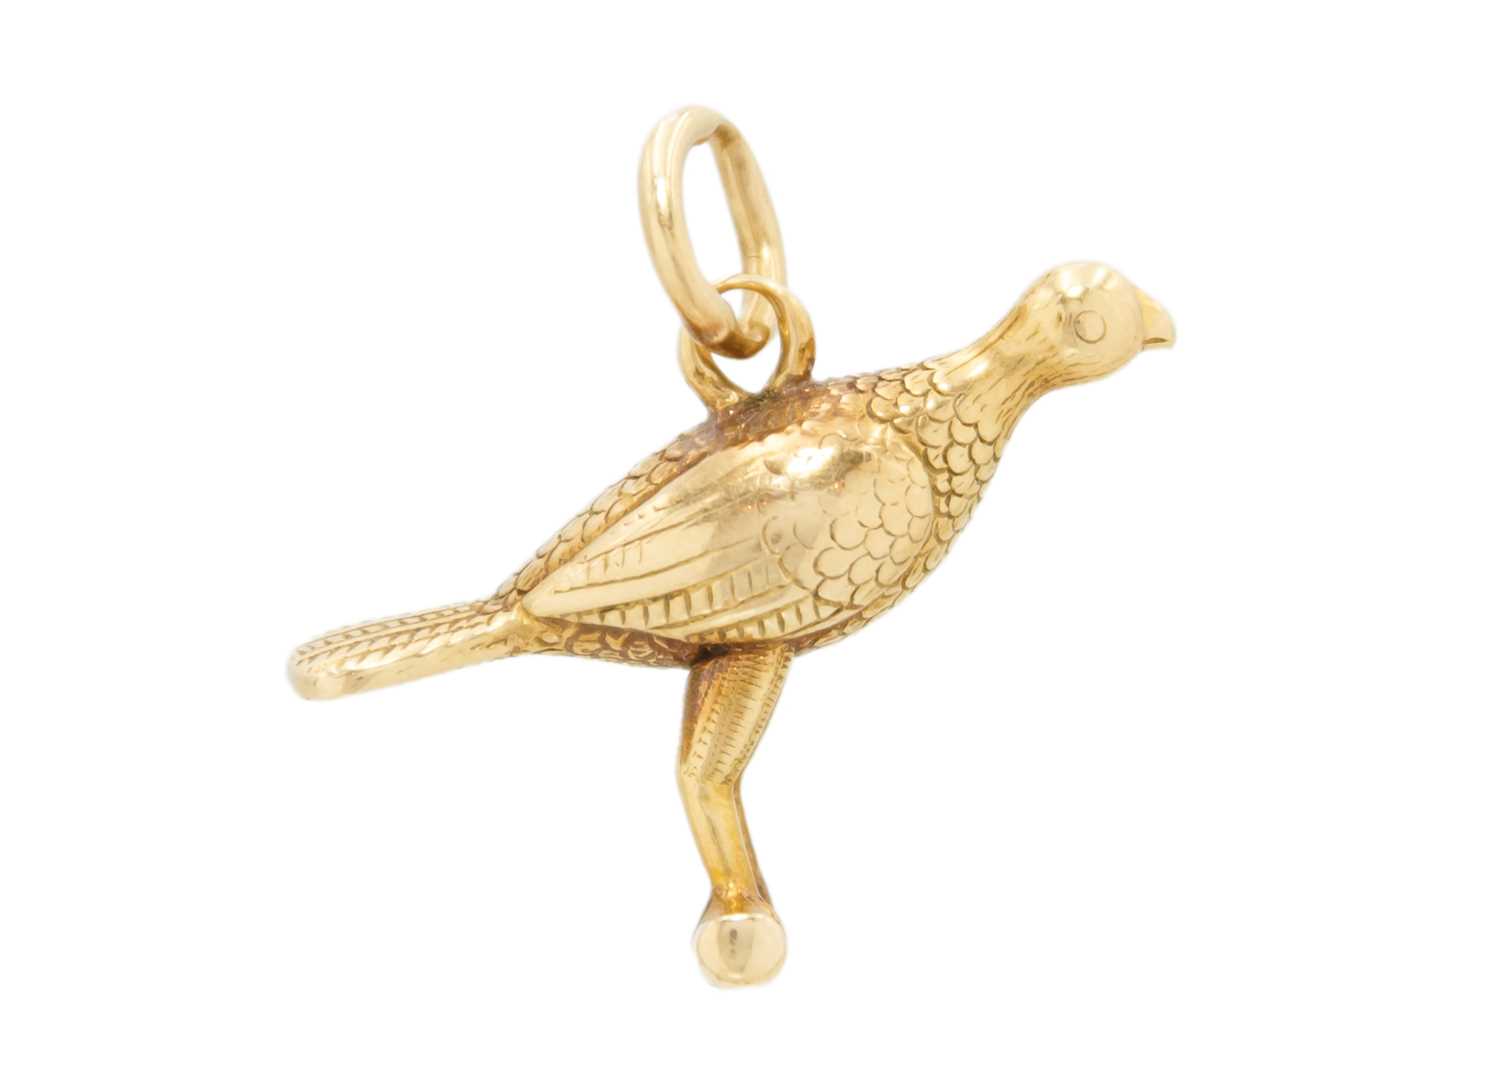 A high purity gold (tests 18ct) bird on a perch charm pendant.